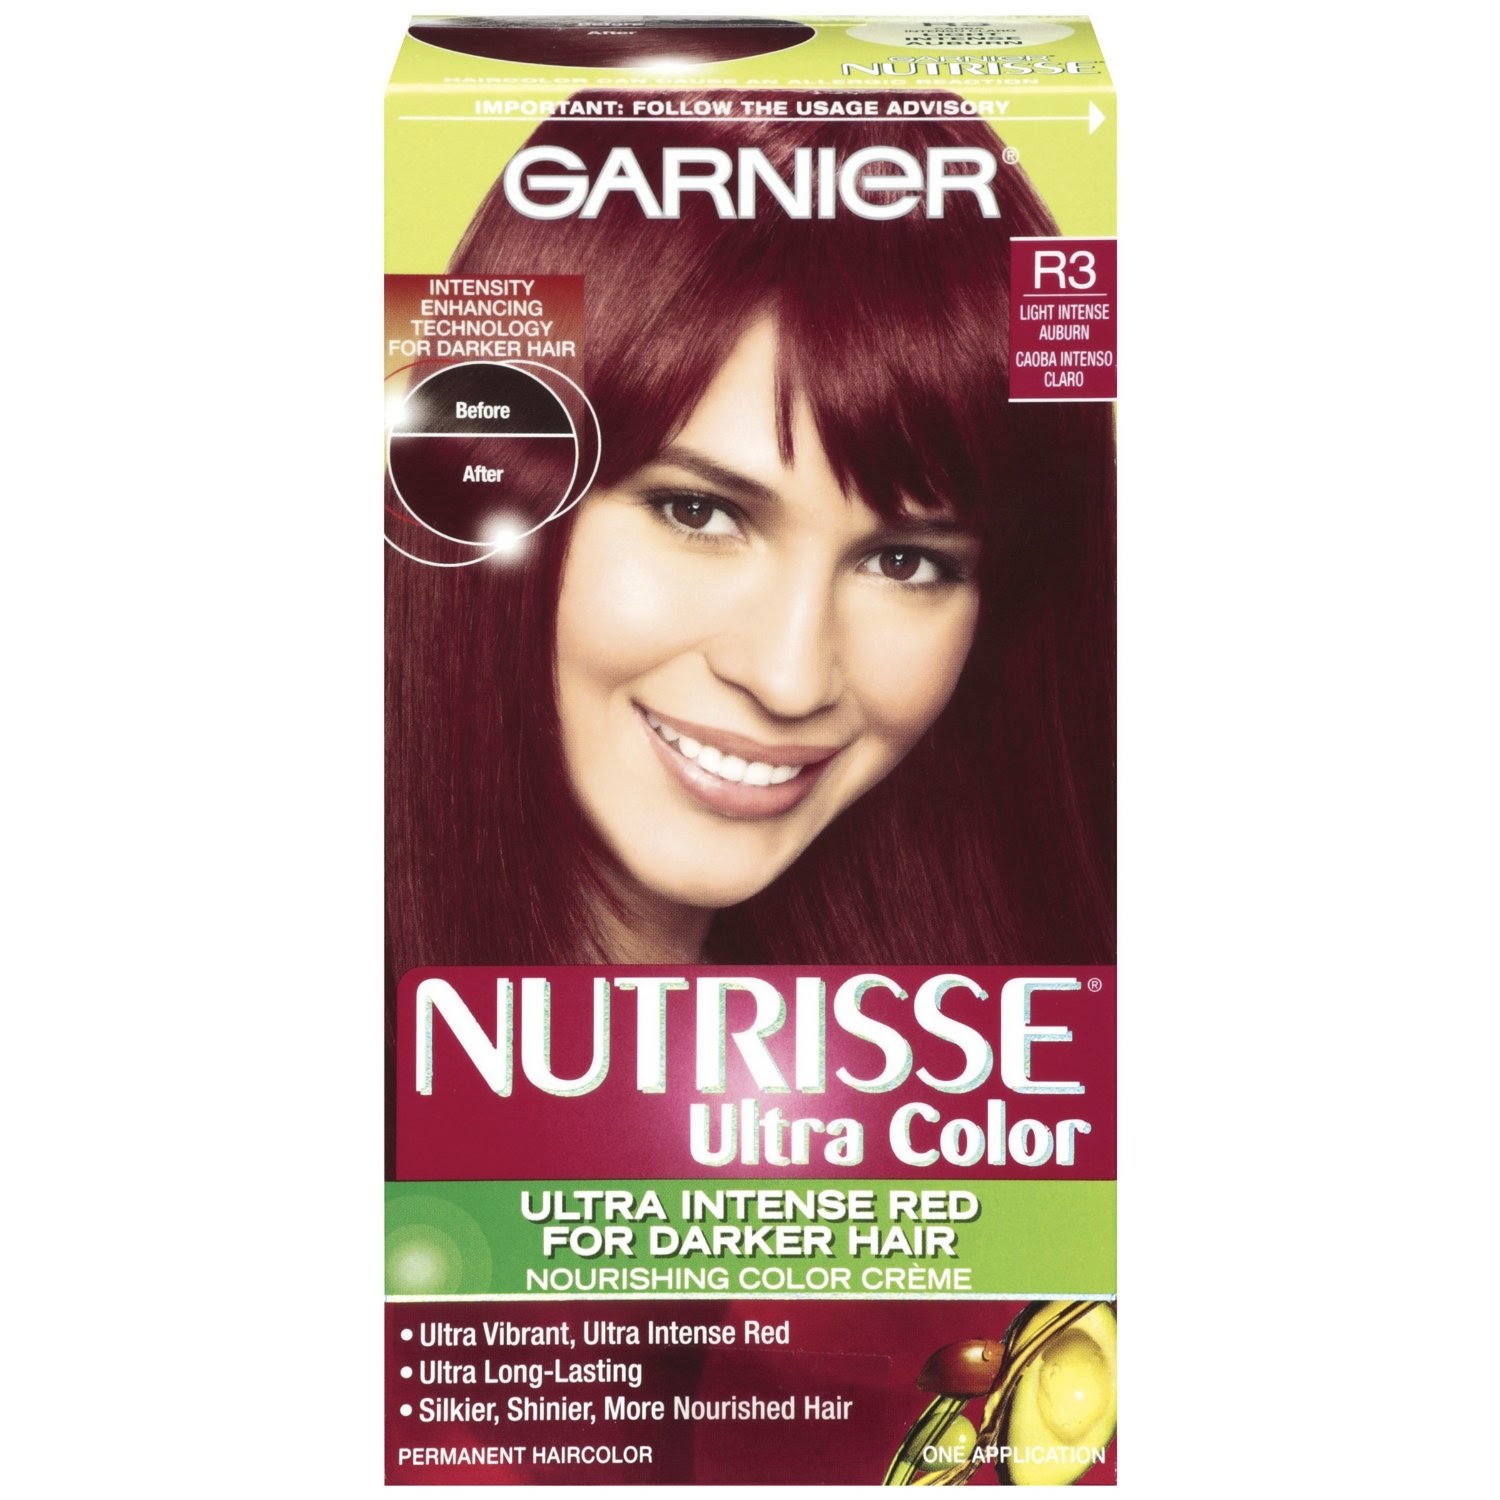 garnier hair color products photo - 1